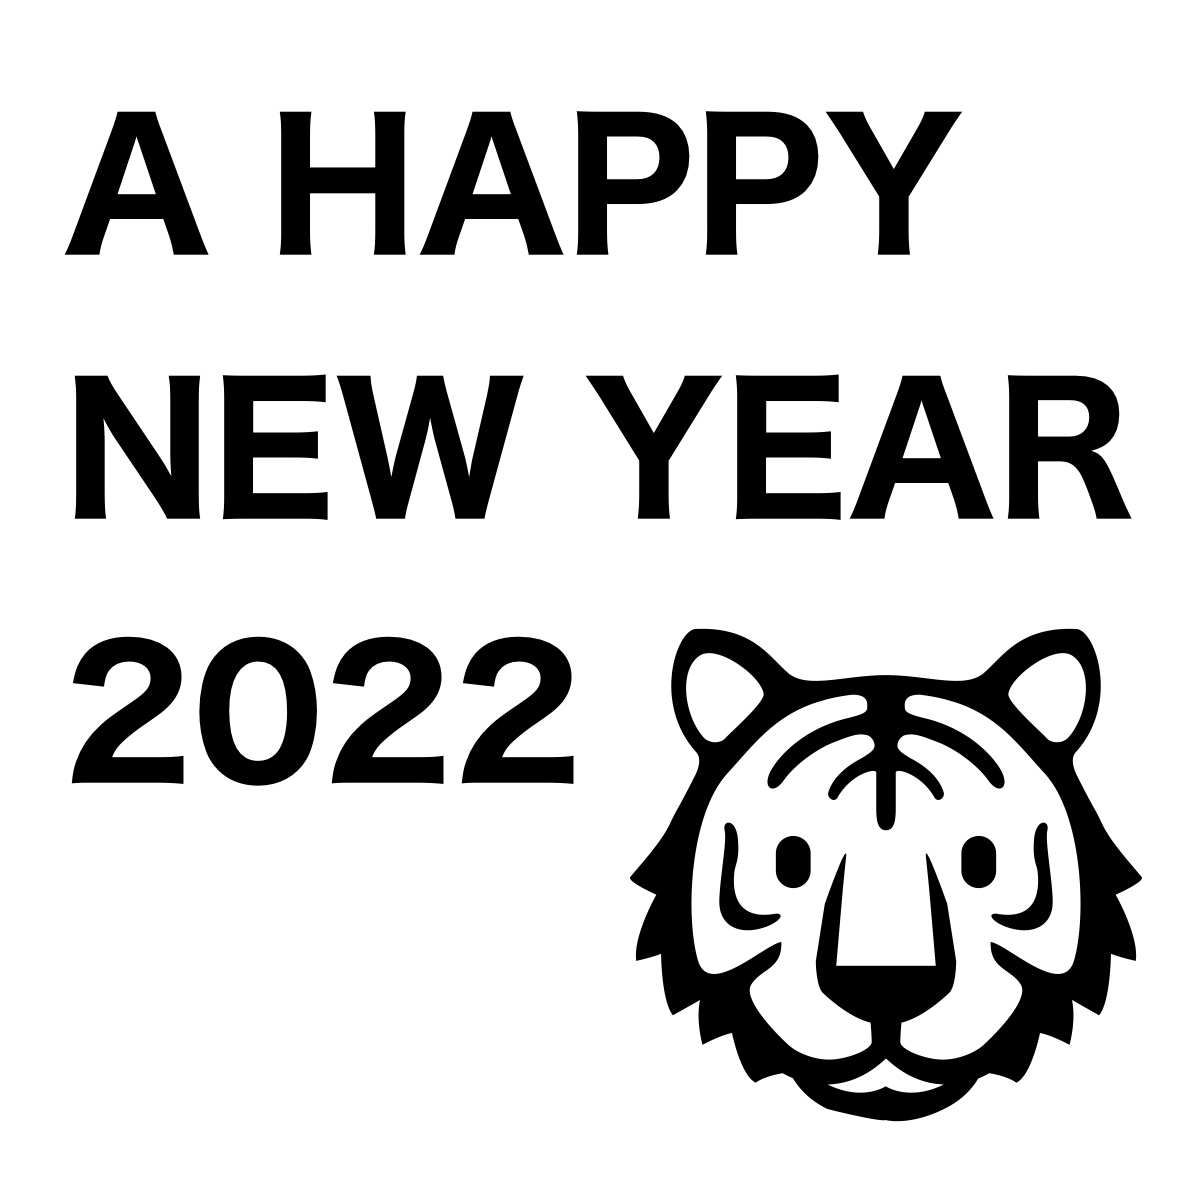 A HAPPY NEW YEAR! 2022!